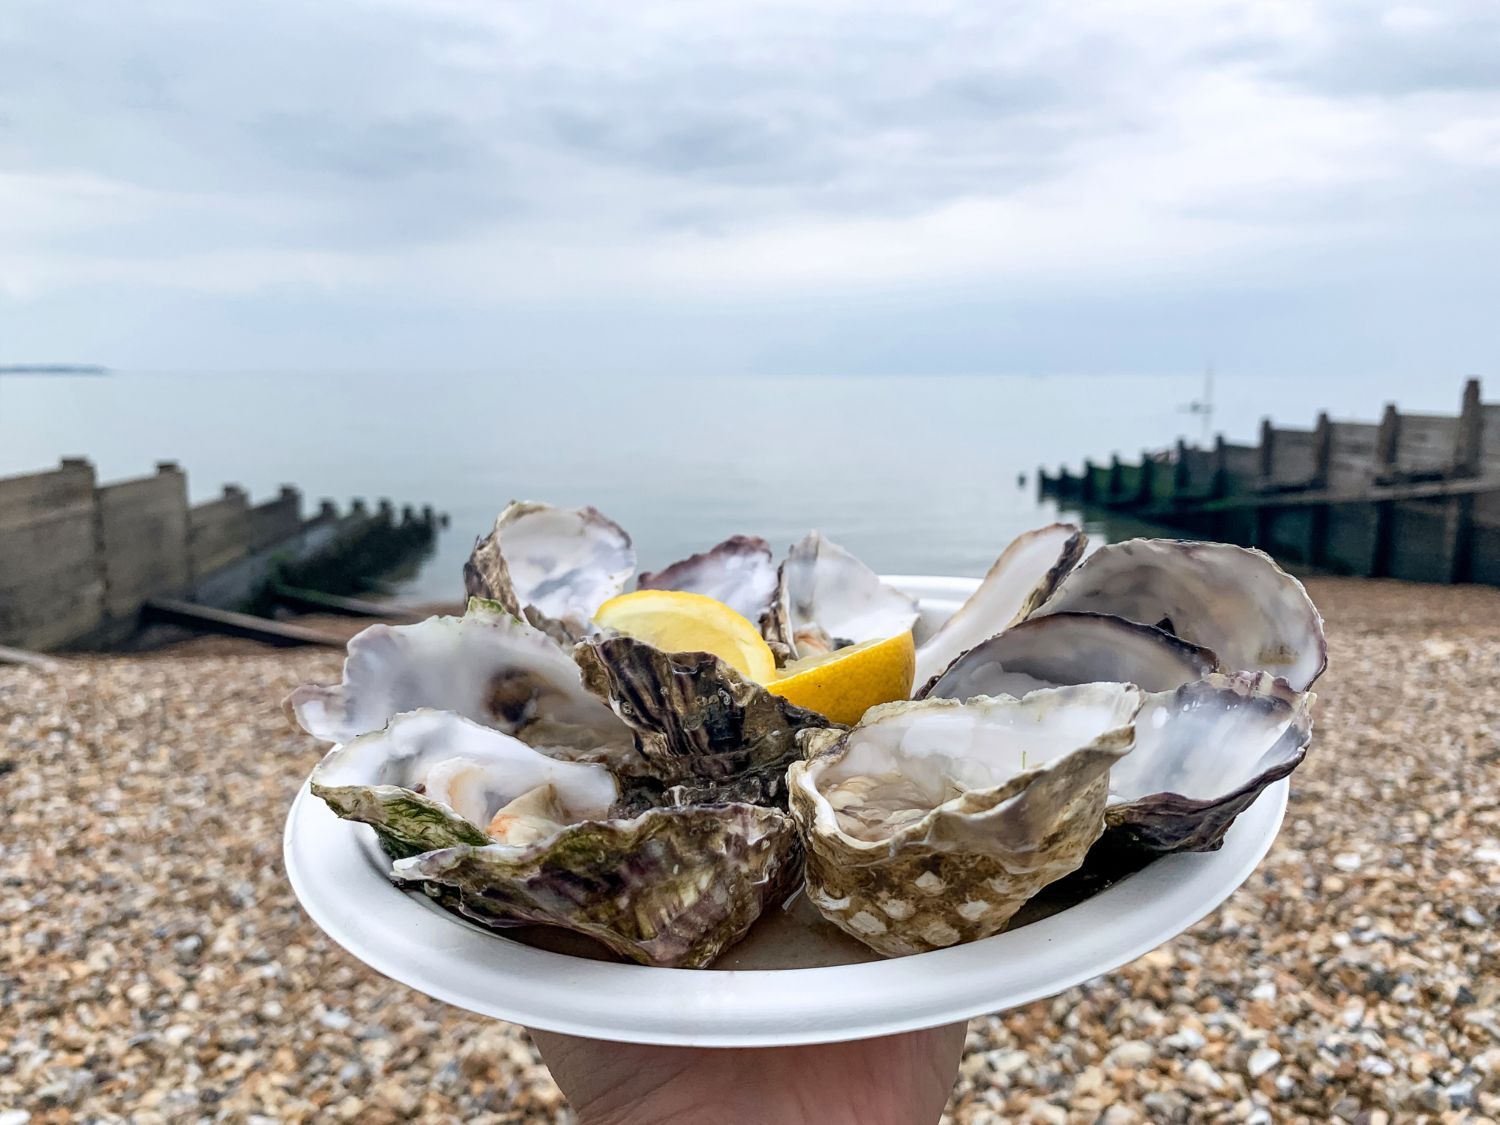 Whistable is an idyllic seaside town renowned for its oysters, which are available year-round. Photo: Getty